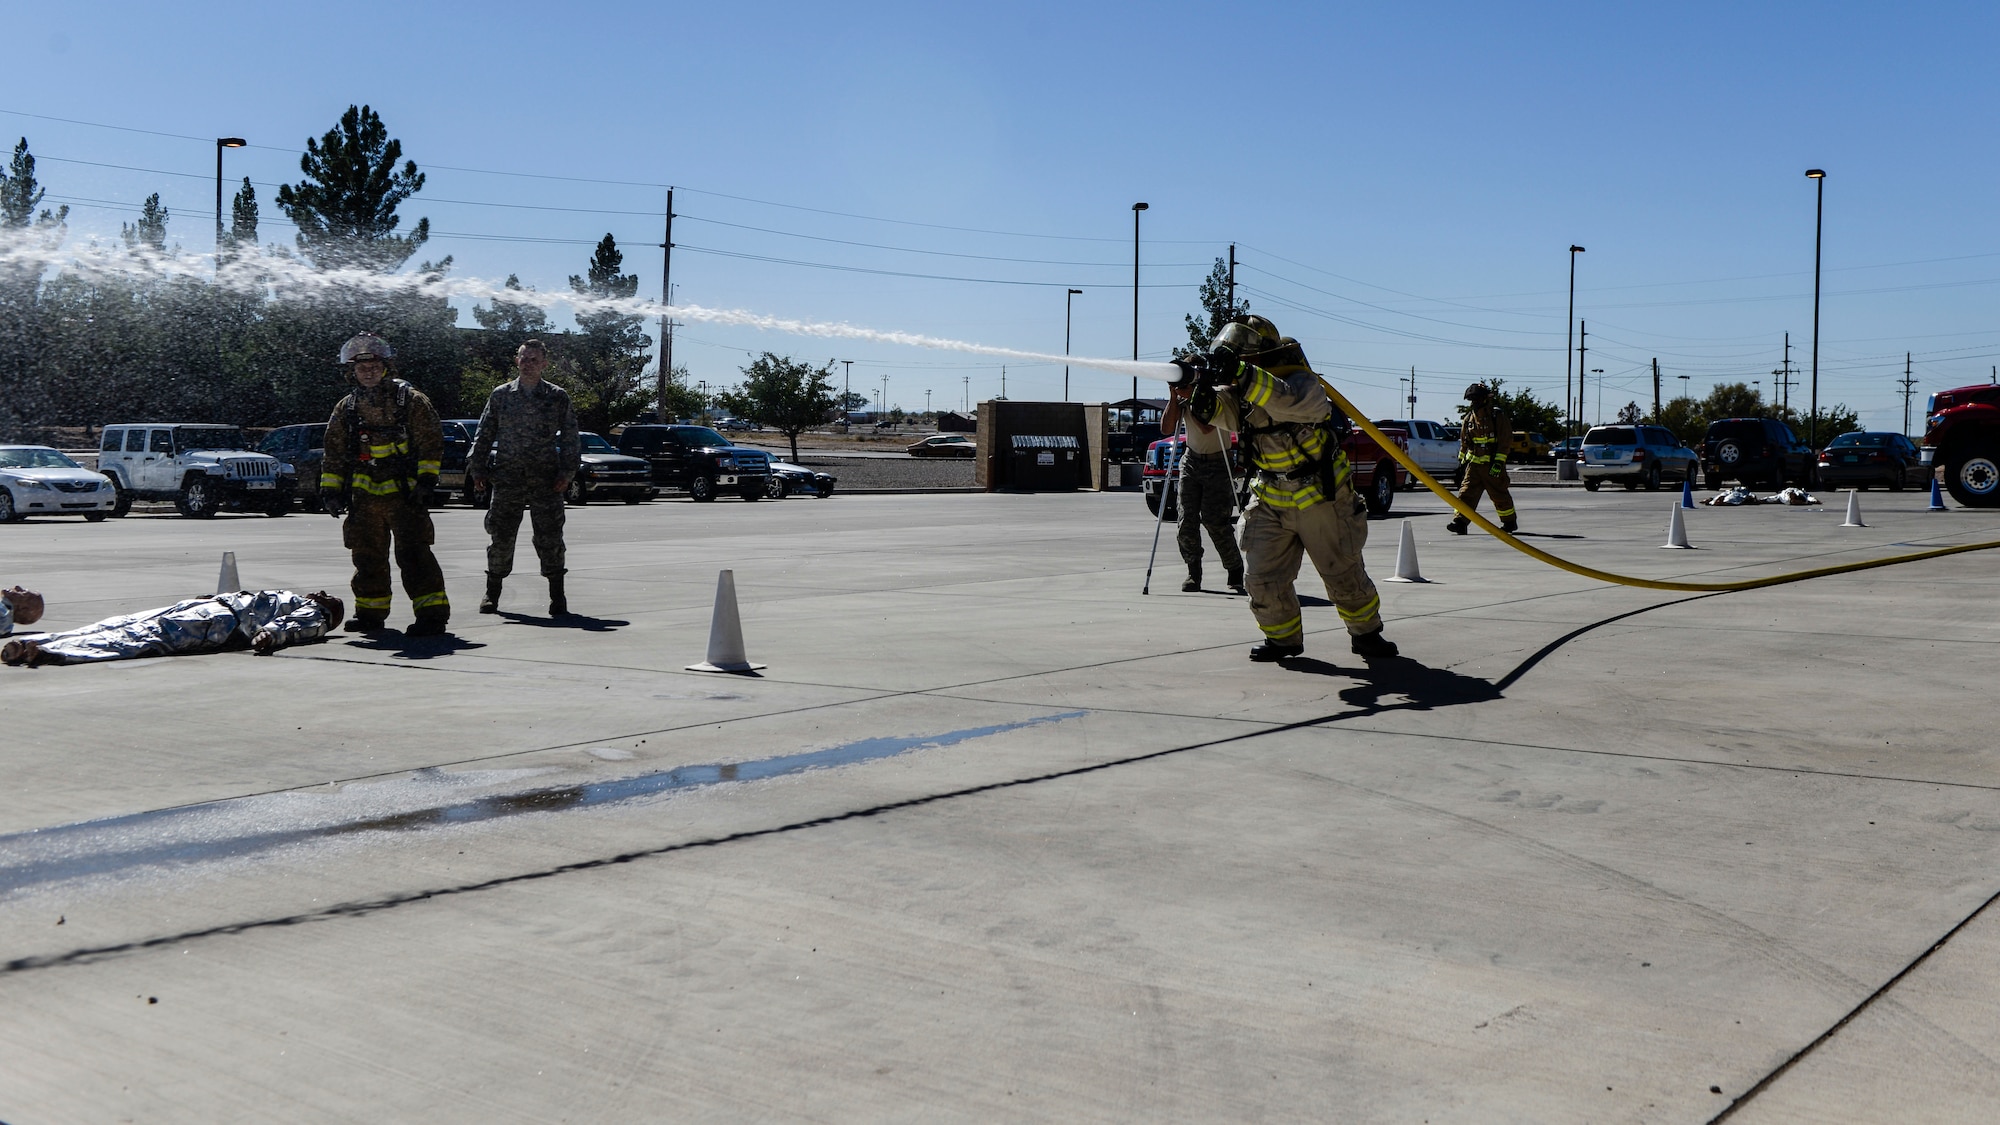 A competitor sprays a fire hose during the firefighter muster challenge, as part of Holloman Air Force Base’s annual Fire Prevention Week, Oct. 14, 2016 at Holloman AFB, N.M. Competitors were fitted in flame retardant suits and raced to complete a variety of physical tasks, including dummy drags and hose pulls. (U.S. Air Force photo by Airman 1st Class Alexis P. Docherty)